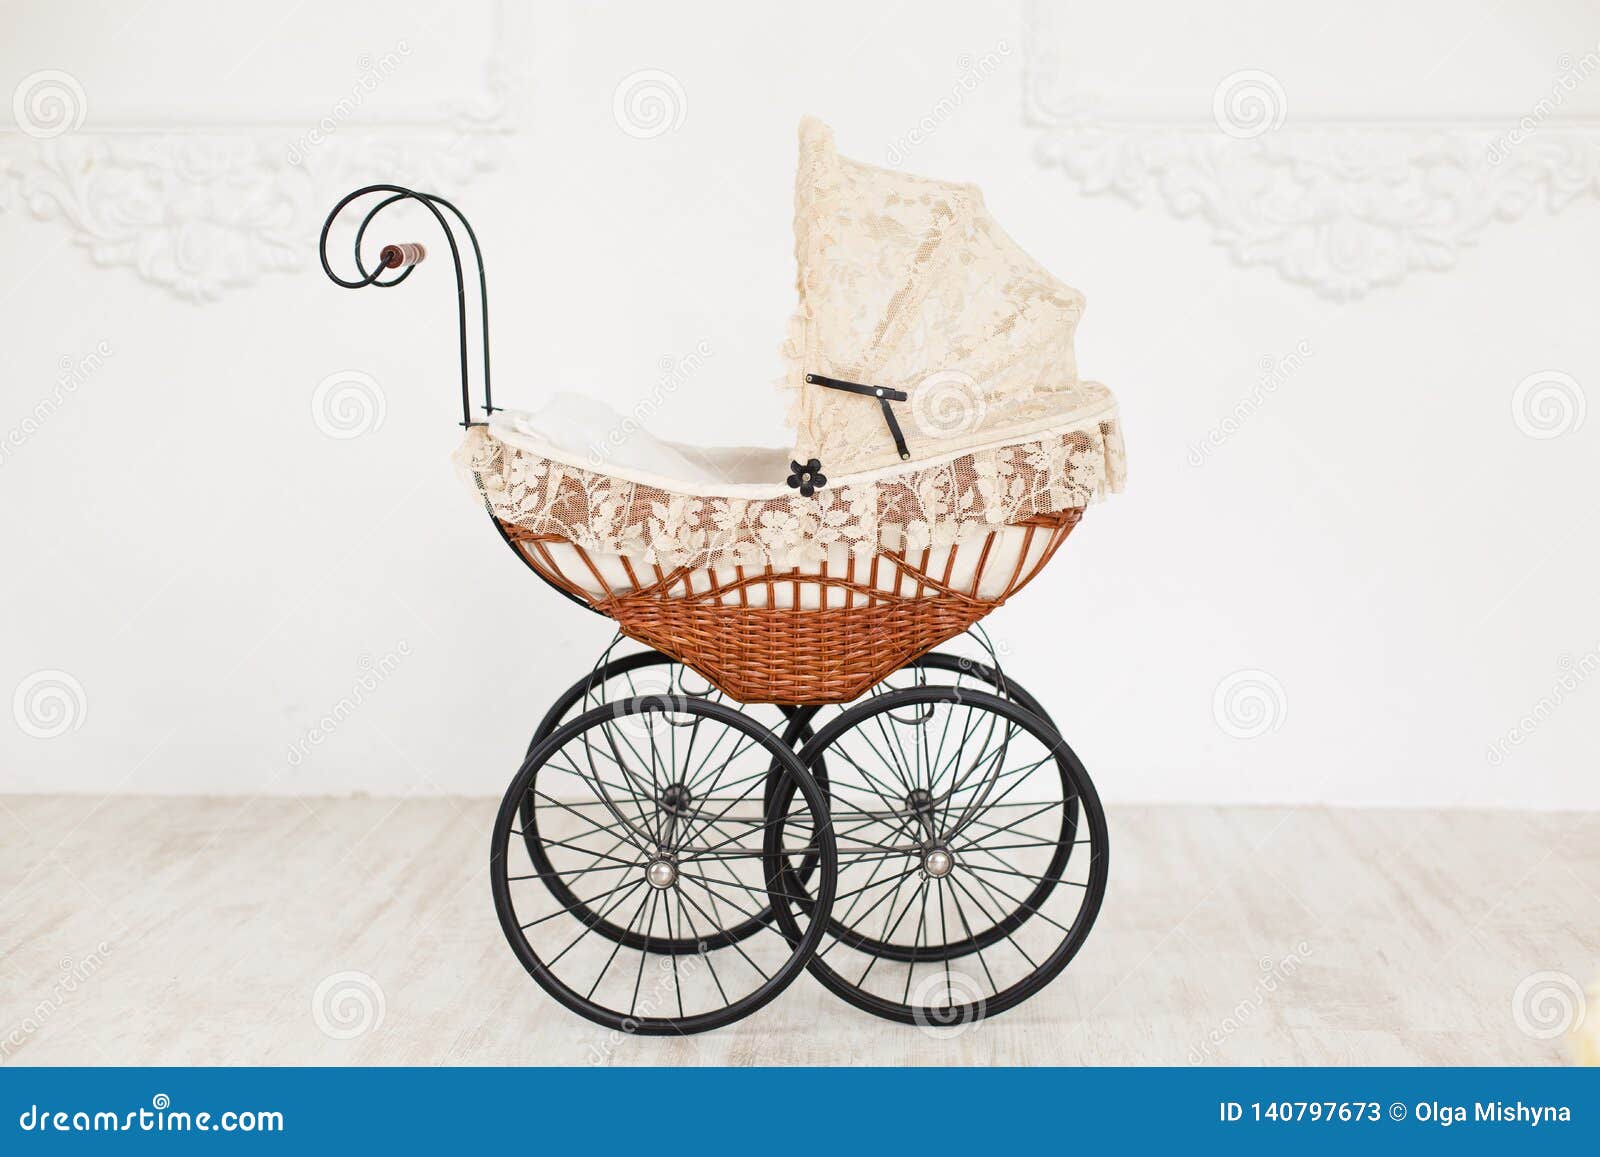 vintage baby buggy